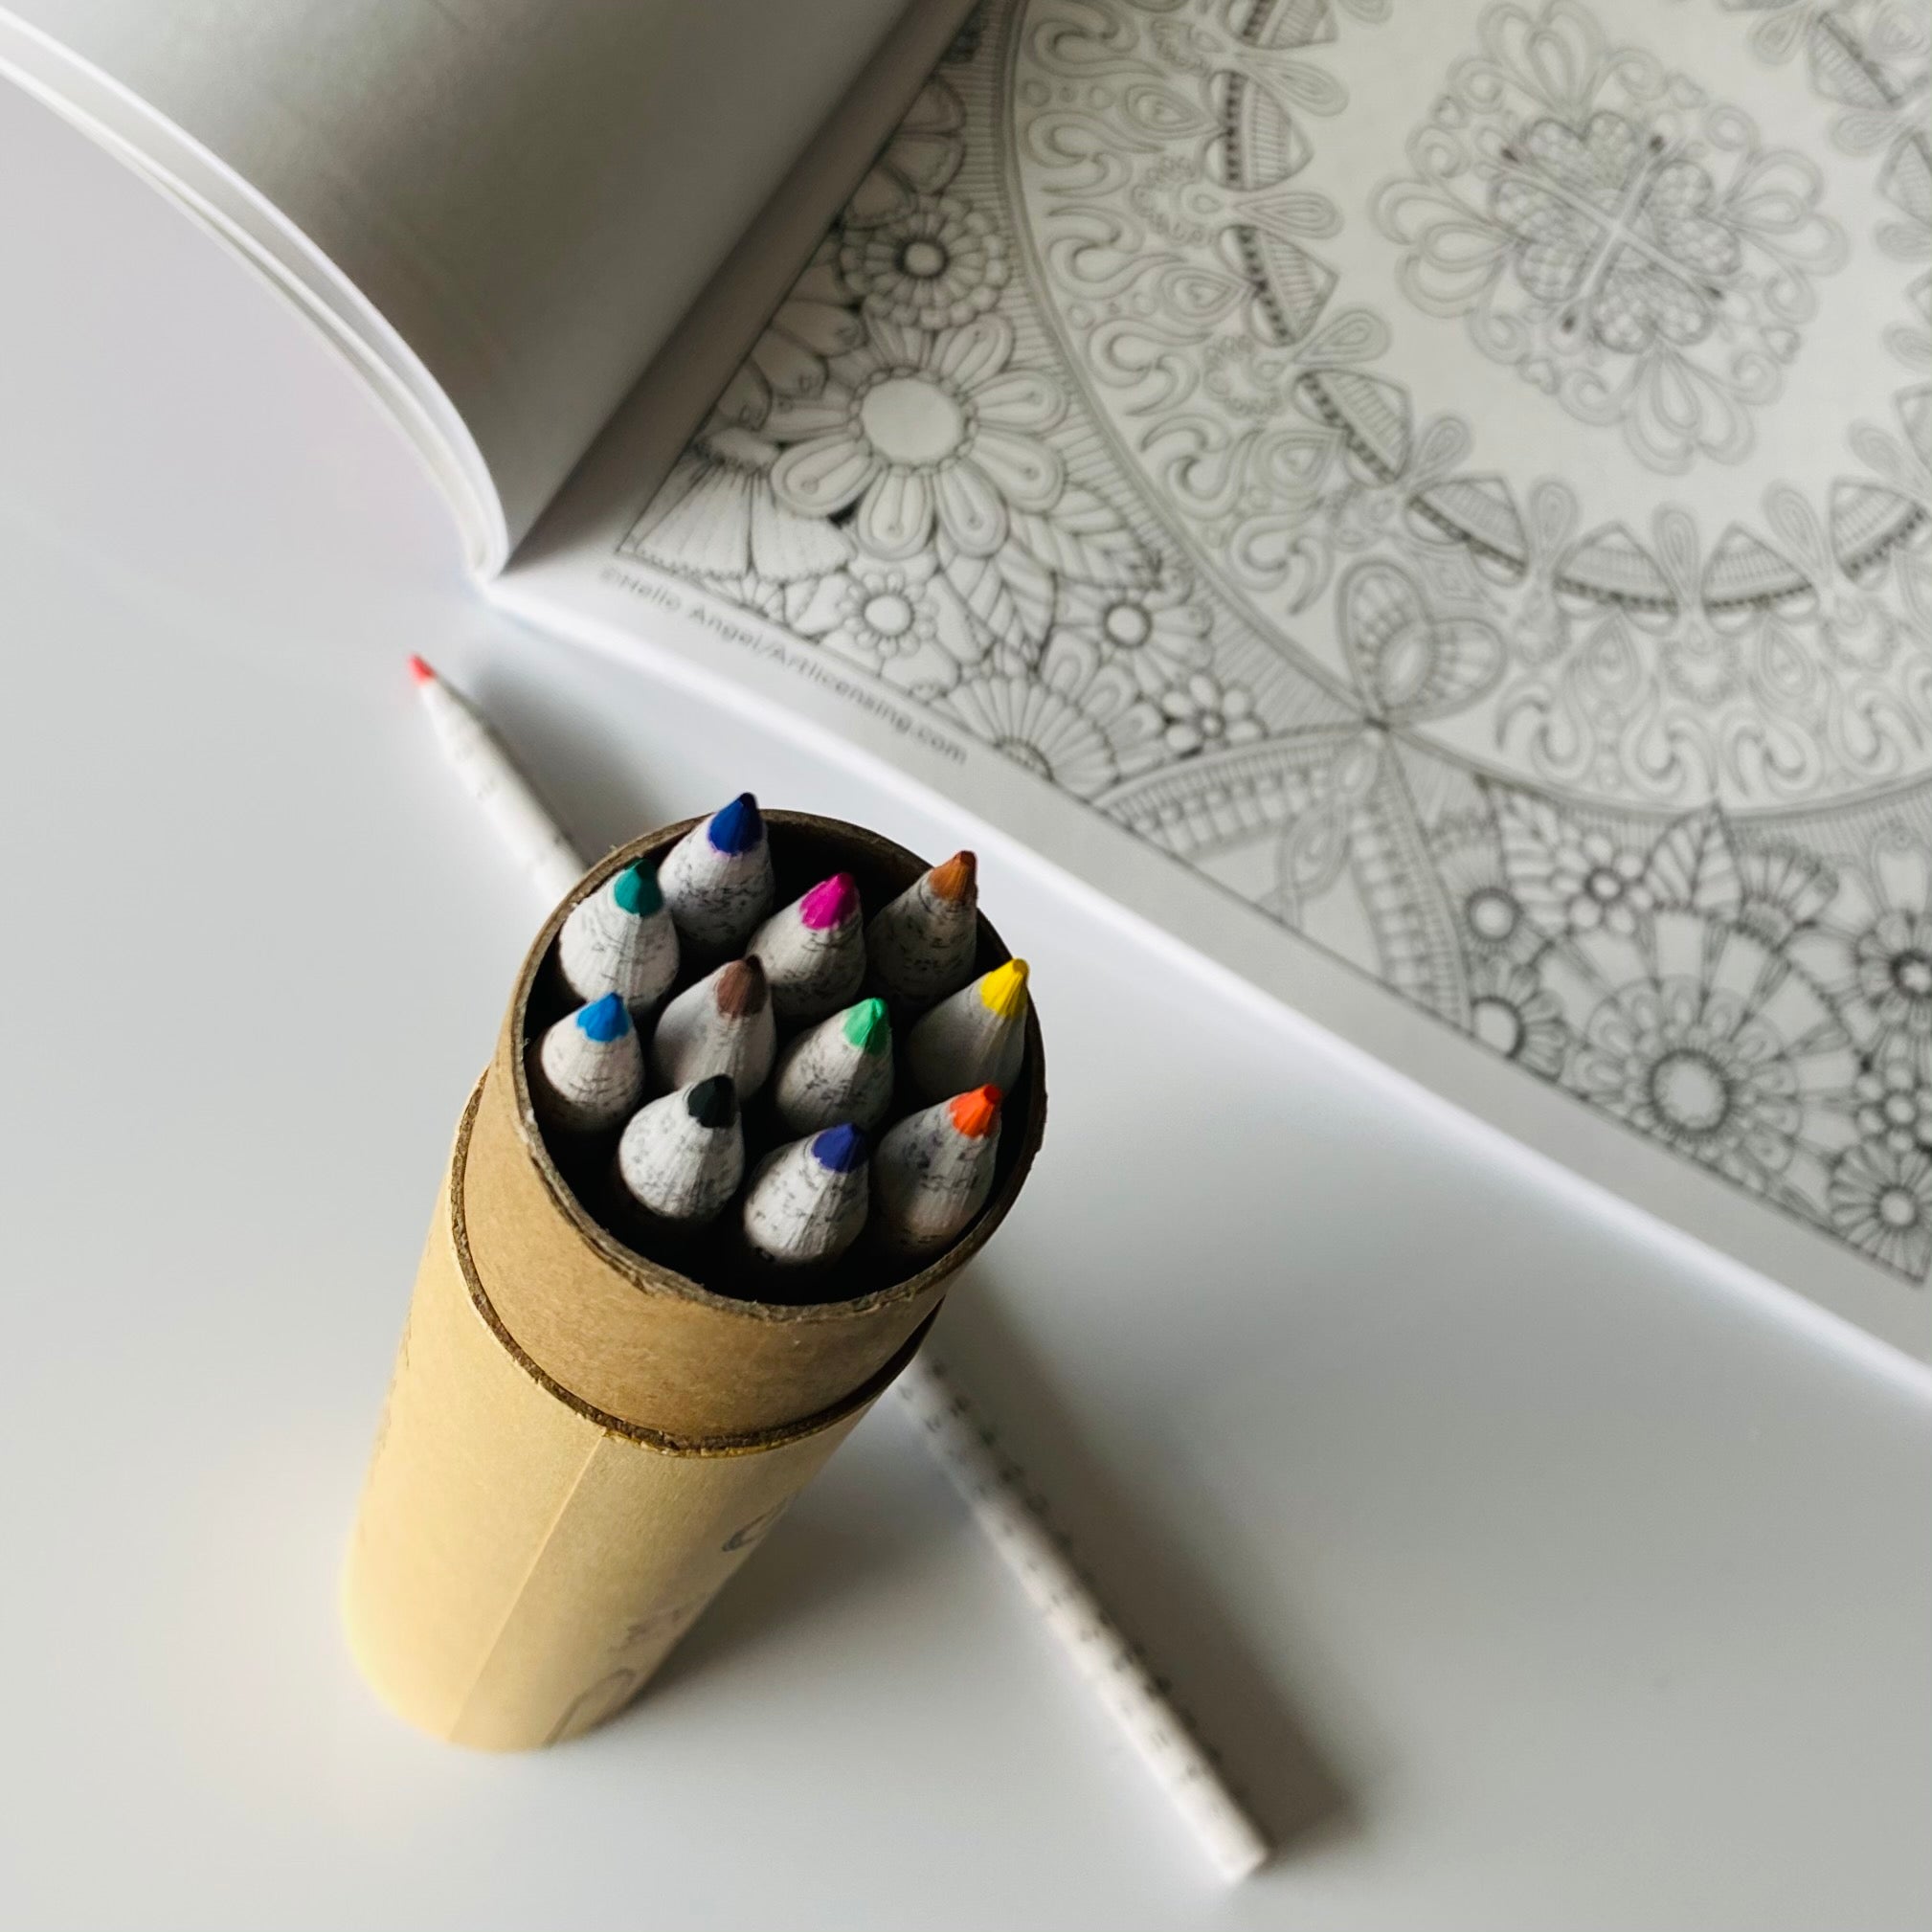 Download Mindfullness Coloring Book And Colored Pencil Set Tech Wellness